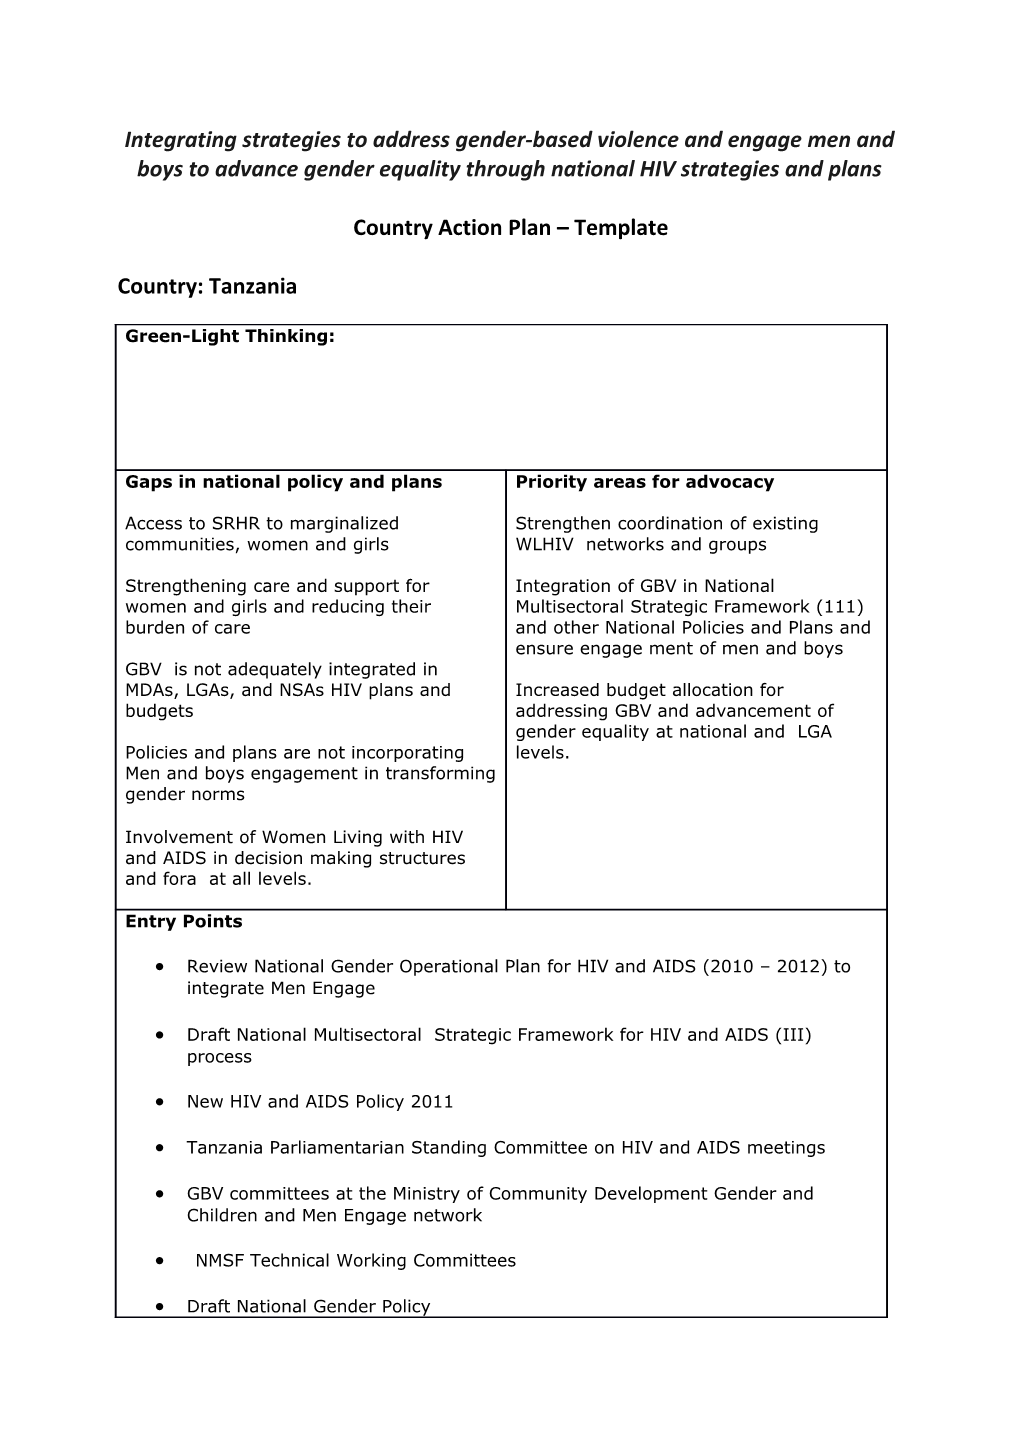 Country Action Plan Template